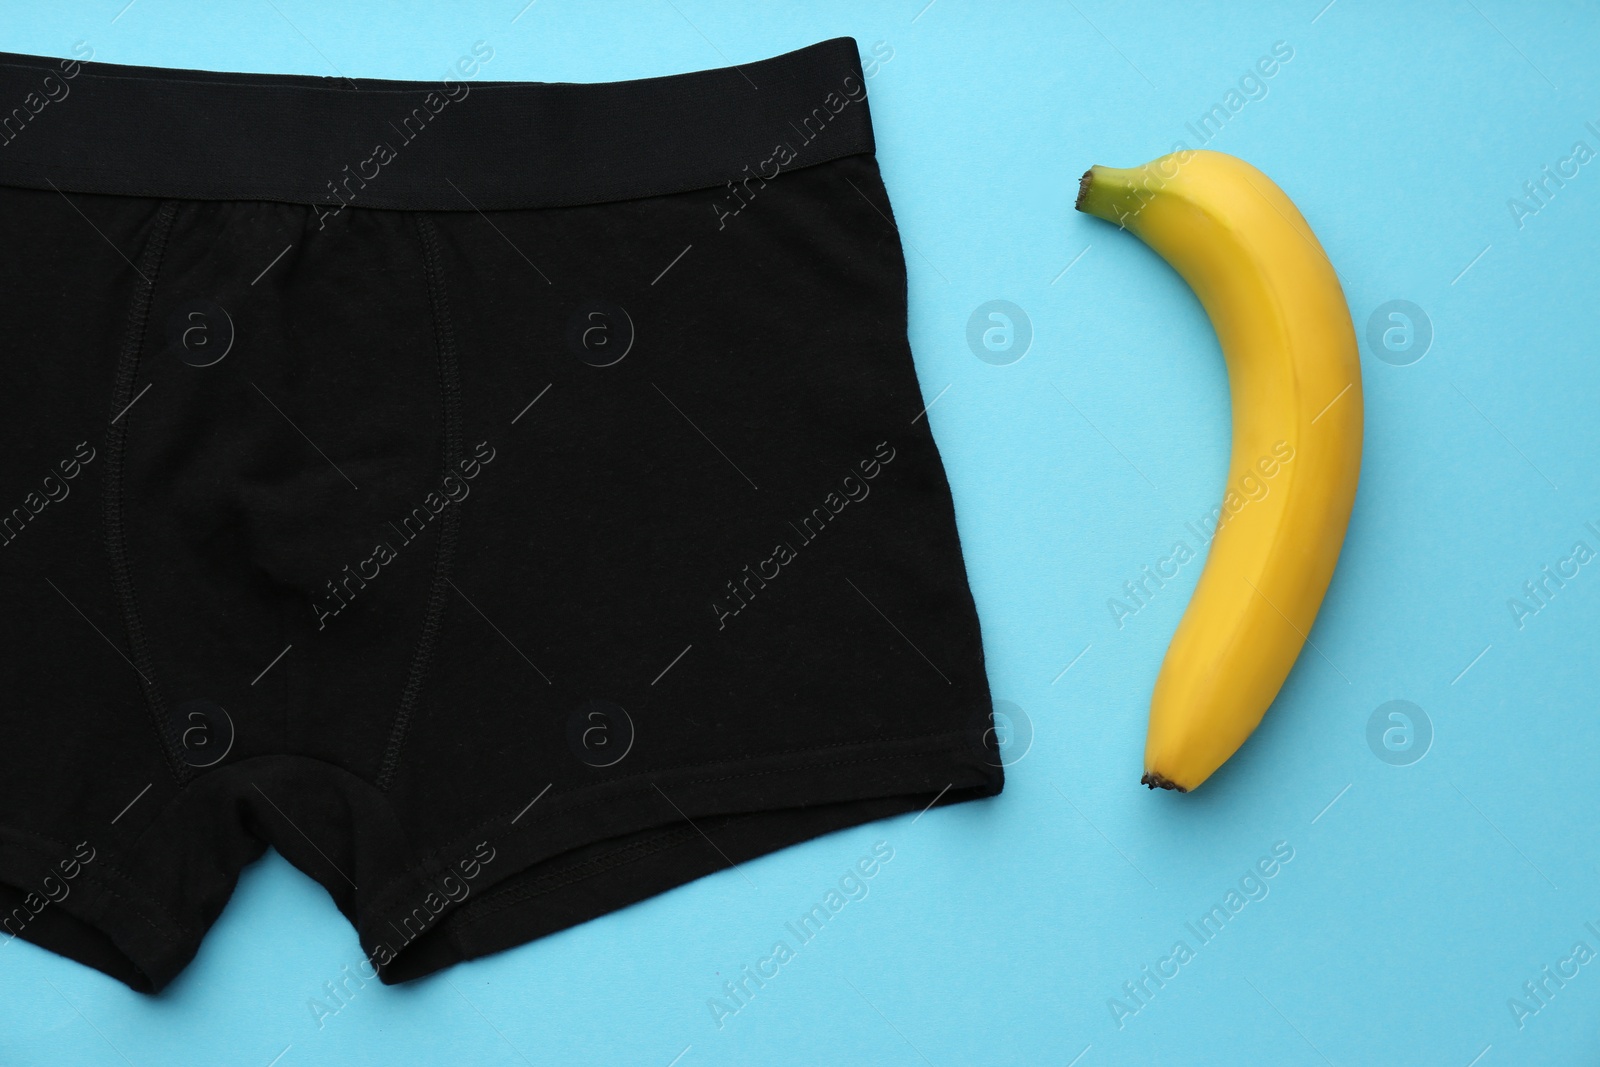 Photo of Men's underwear and banana on light blue background, flat lay. Potency problem concept